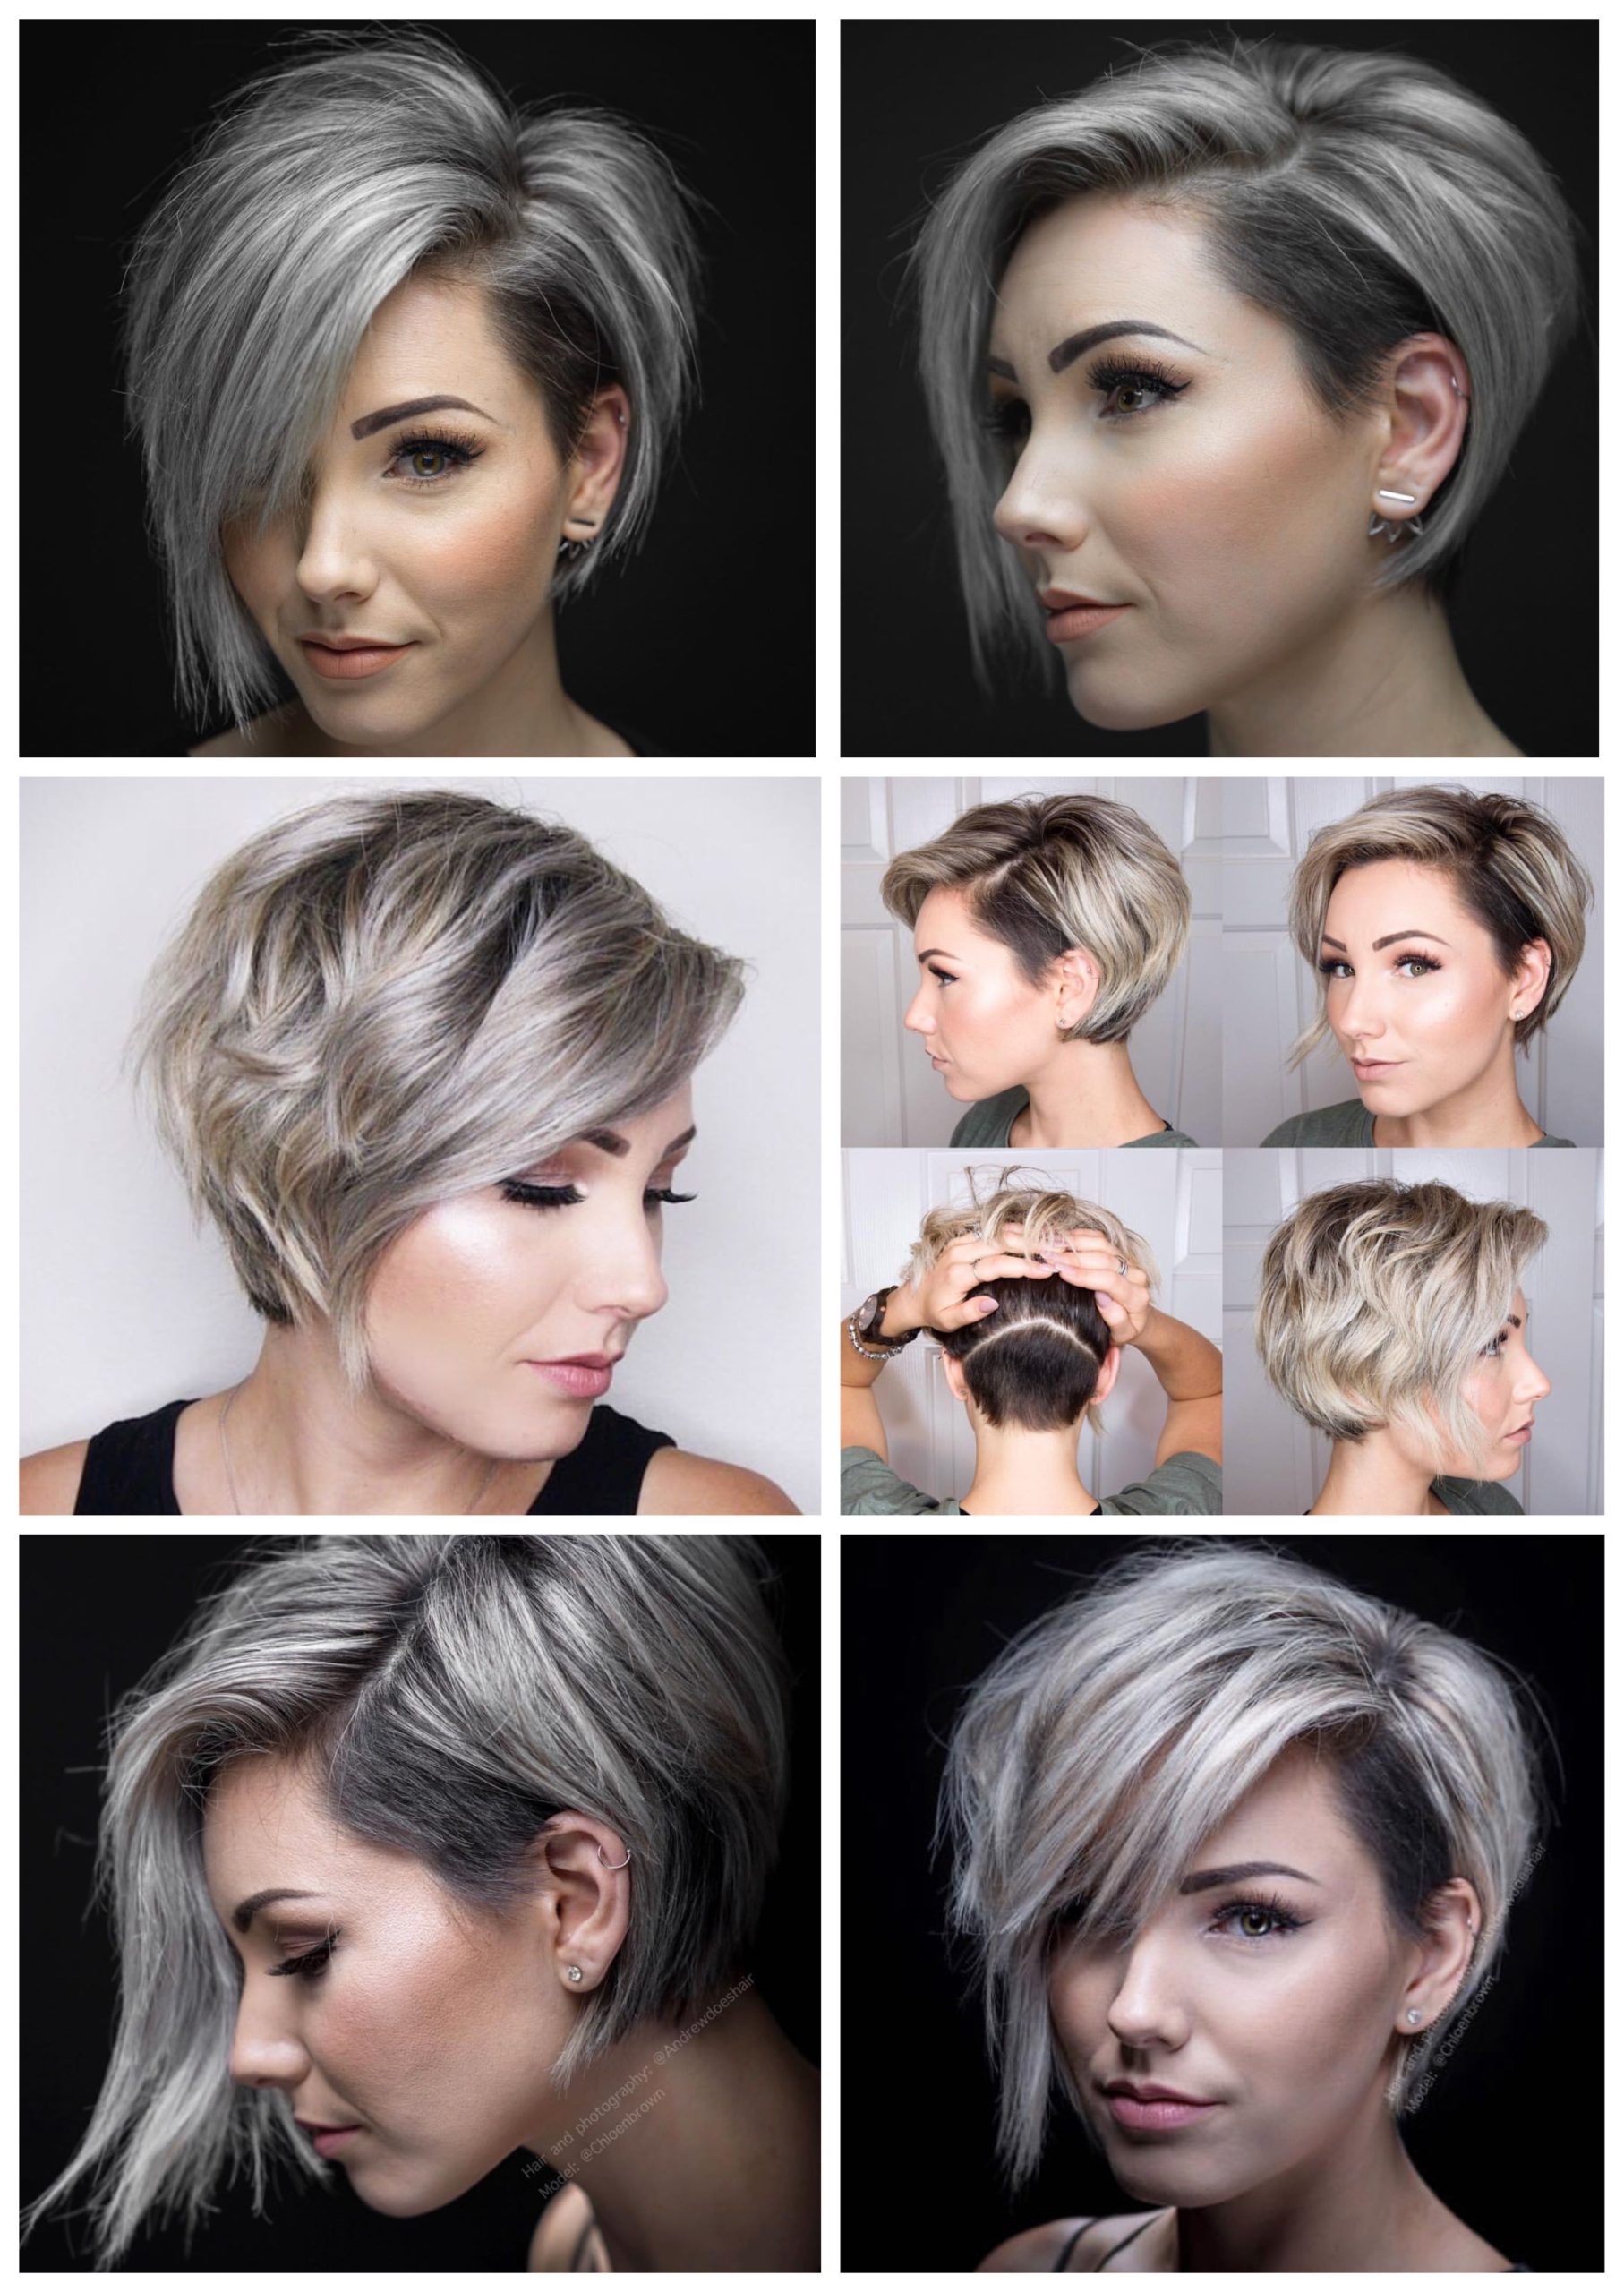 Hairstyle Trends - 26 Eye-Catching Undercut Bob Haircuts To Consider ...